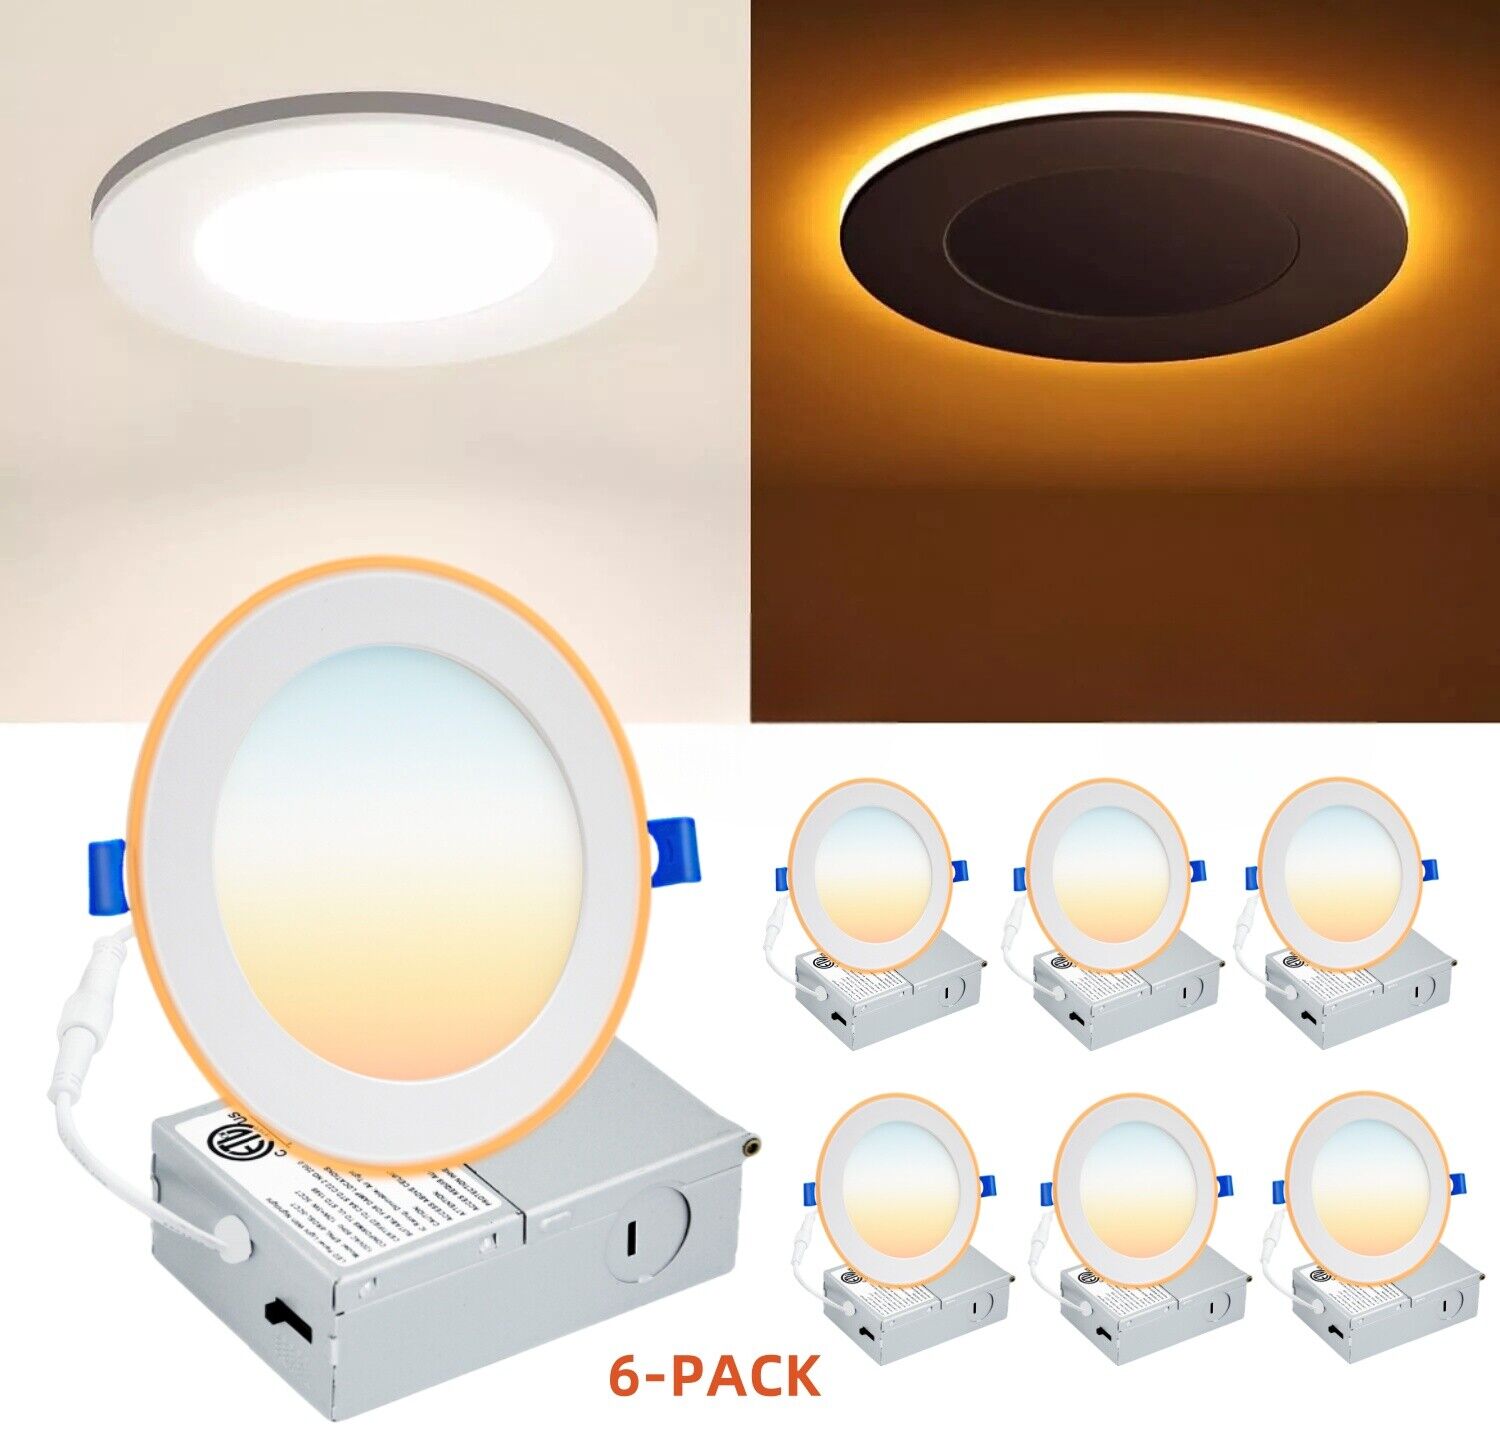 6/12/24/36/48 Pack 6-inch Ultra Thin LED Recessed Ceiling Light & Junction Box